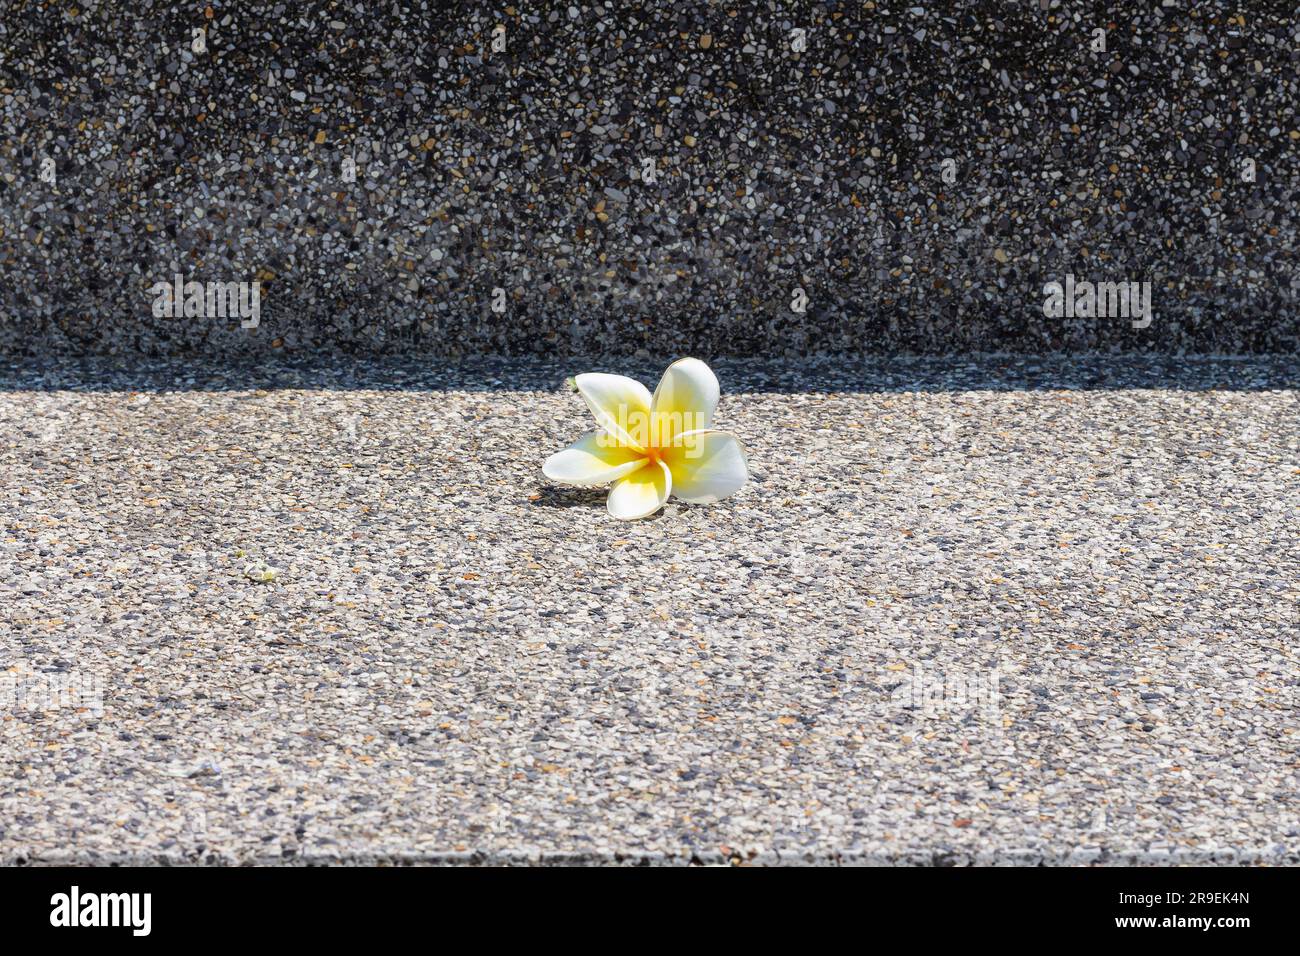 small frangipani flower on concrete steps in street of thailand, concept of geometry and lines. single white plumeria flower,decoration or complement Stock Photo